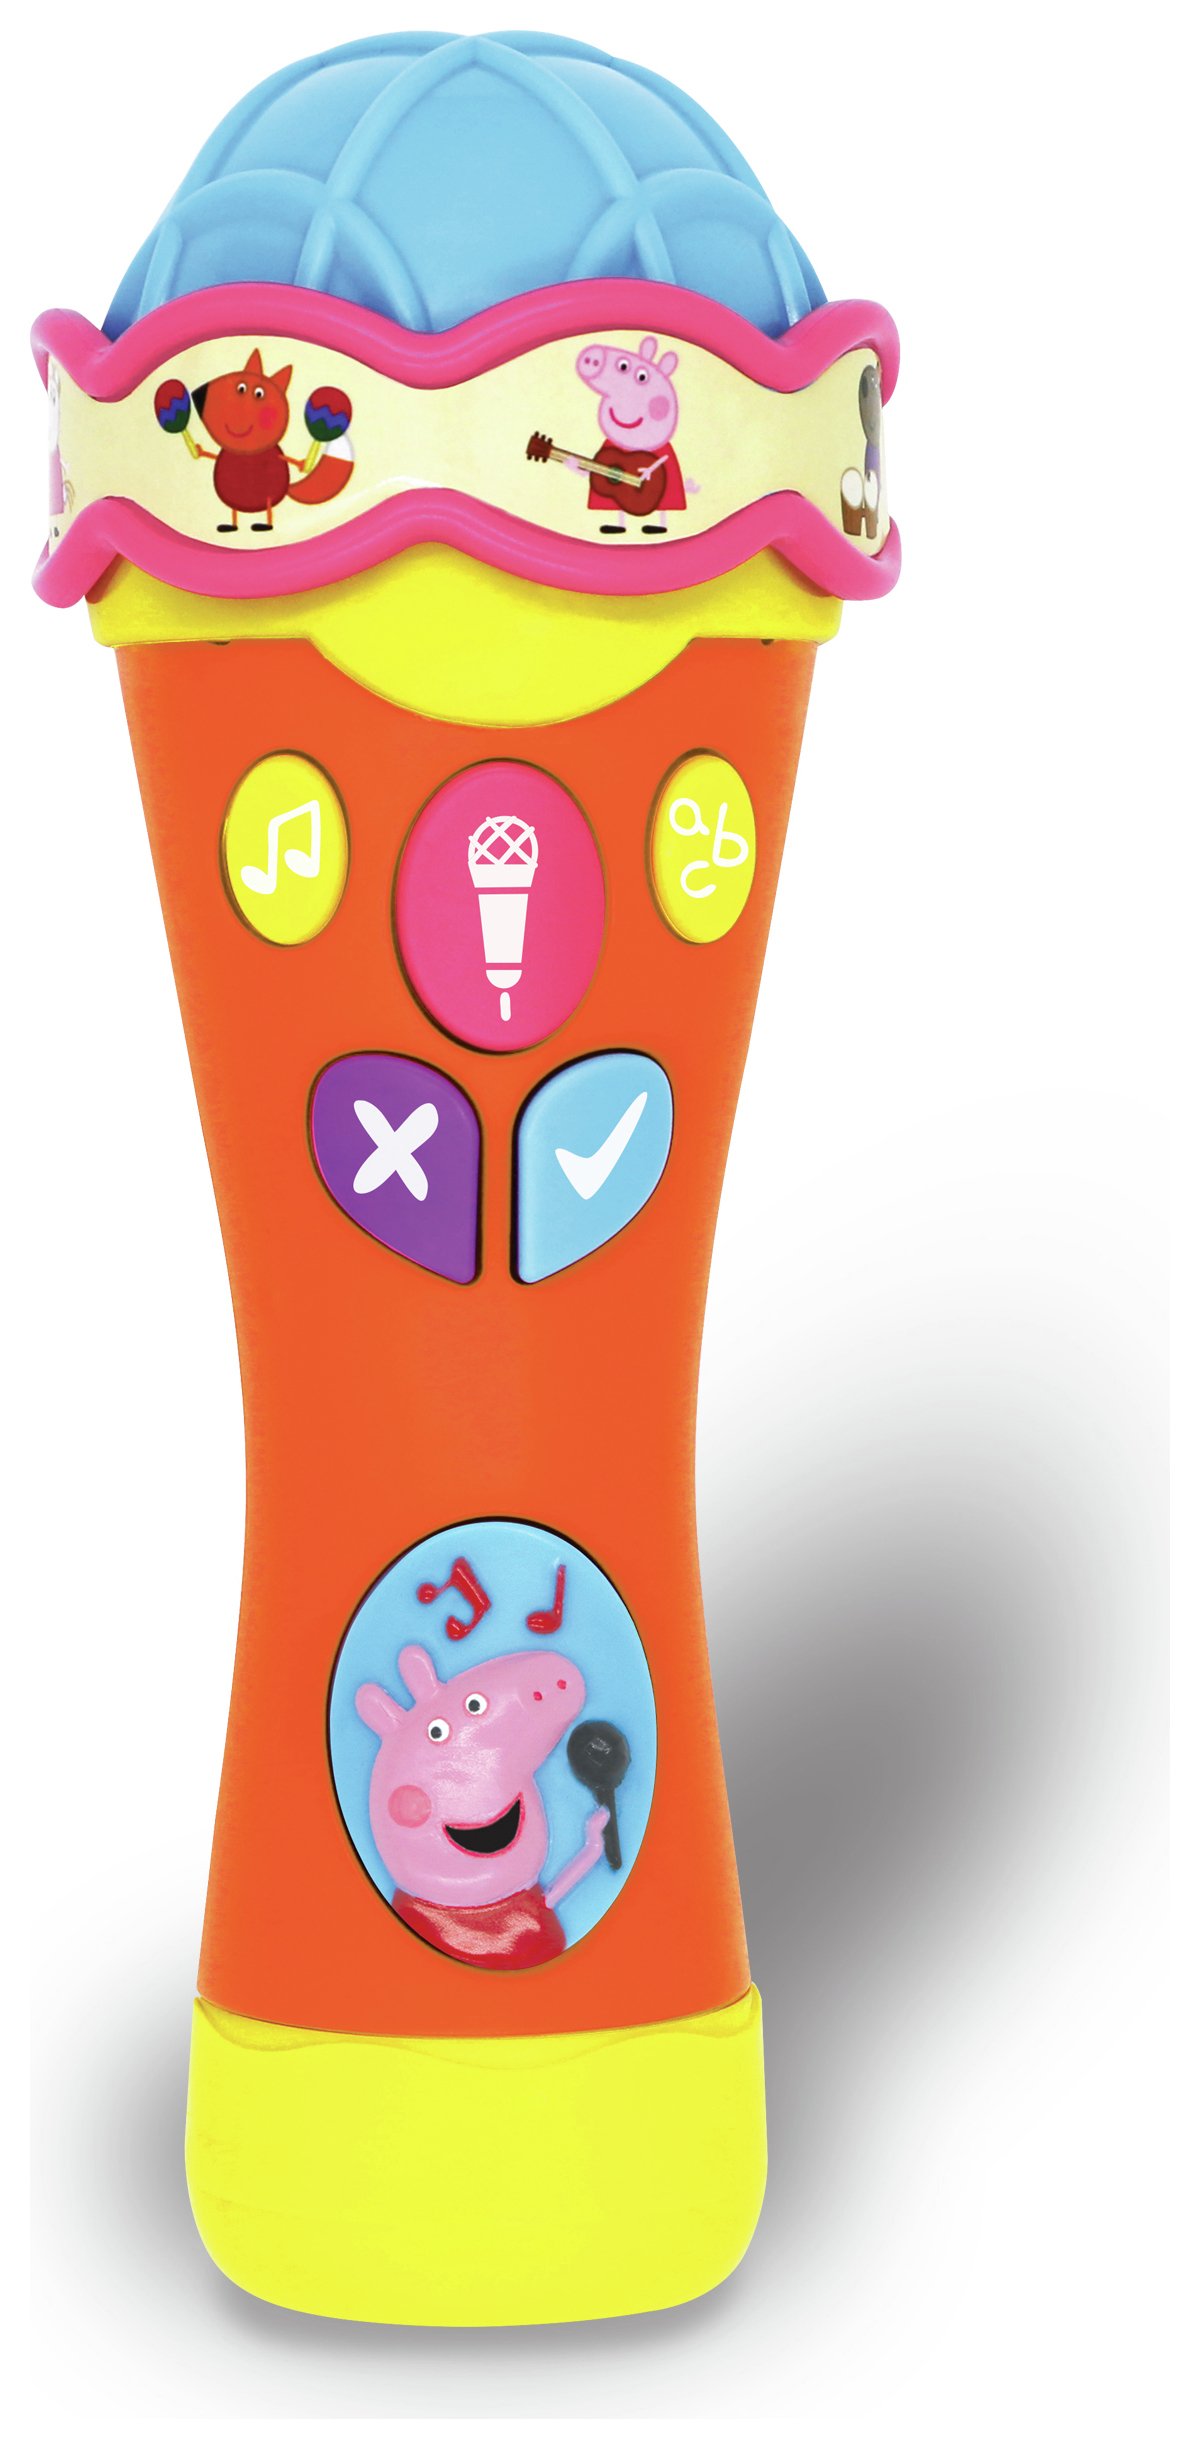 Peppa Pig Sing and Learn Microphone.